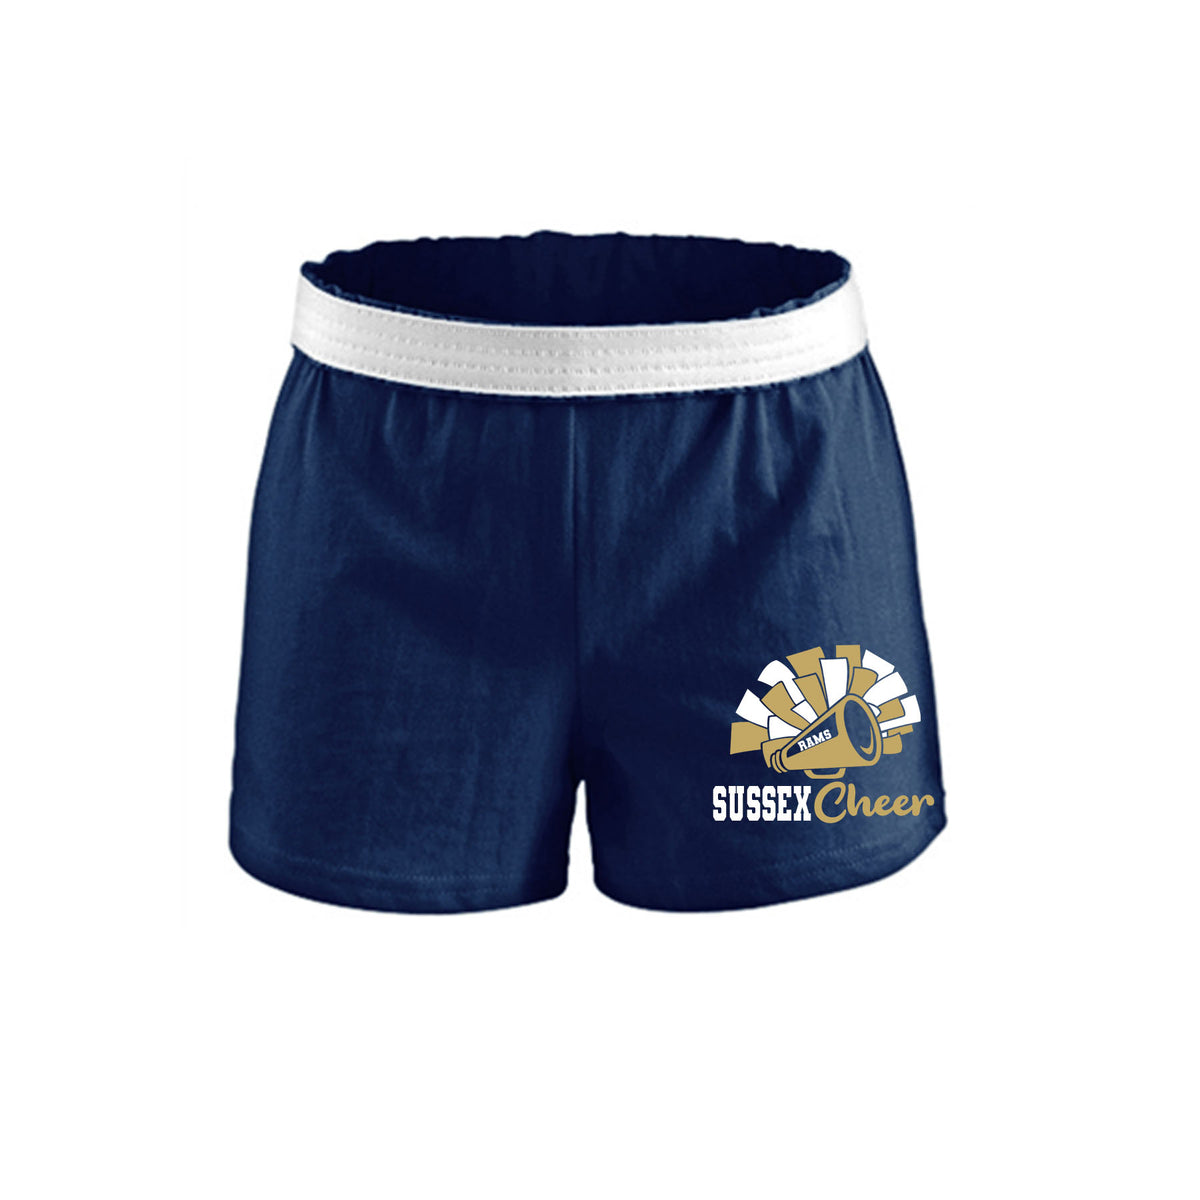 Sussex Middle Cheer girls Shorts Design 2